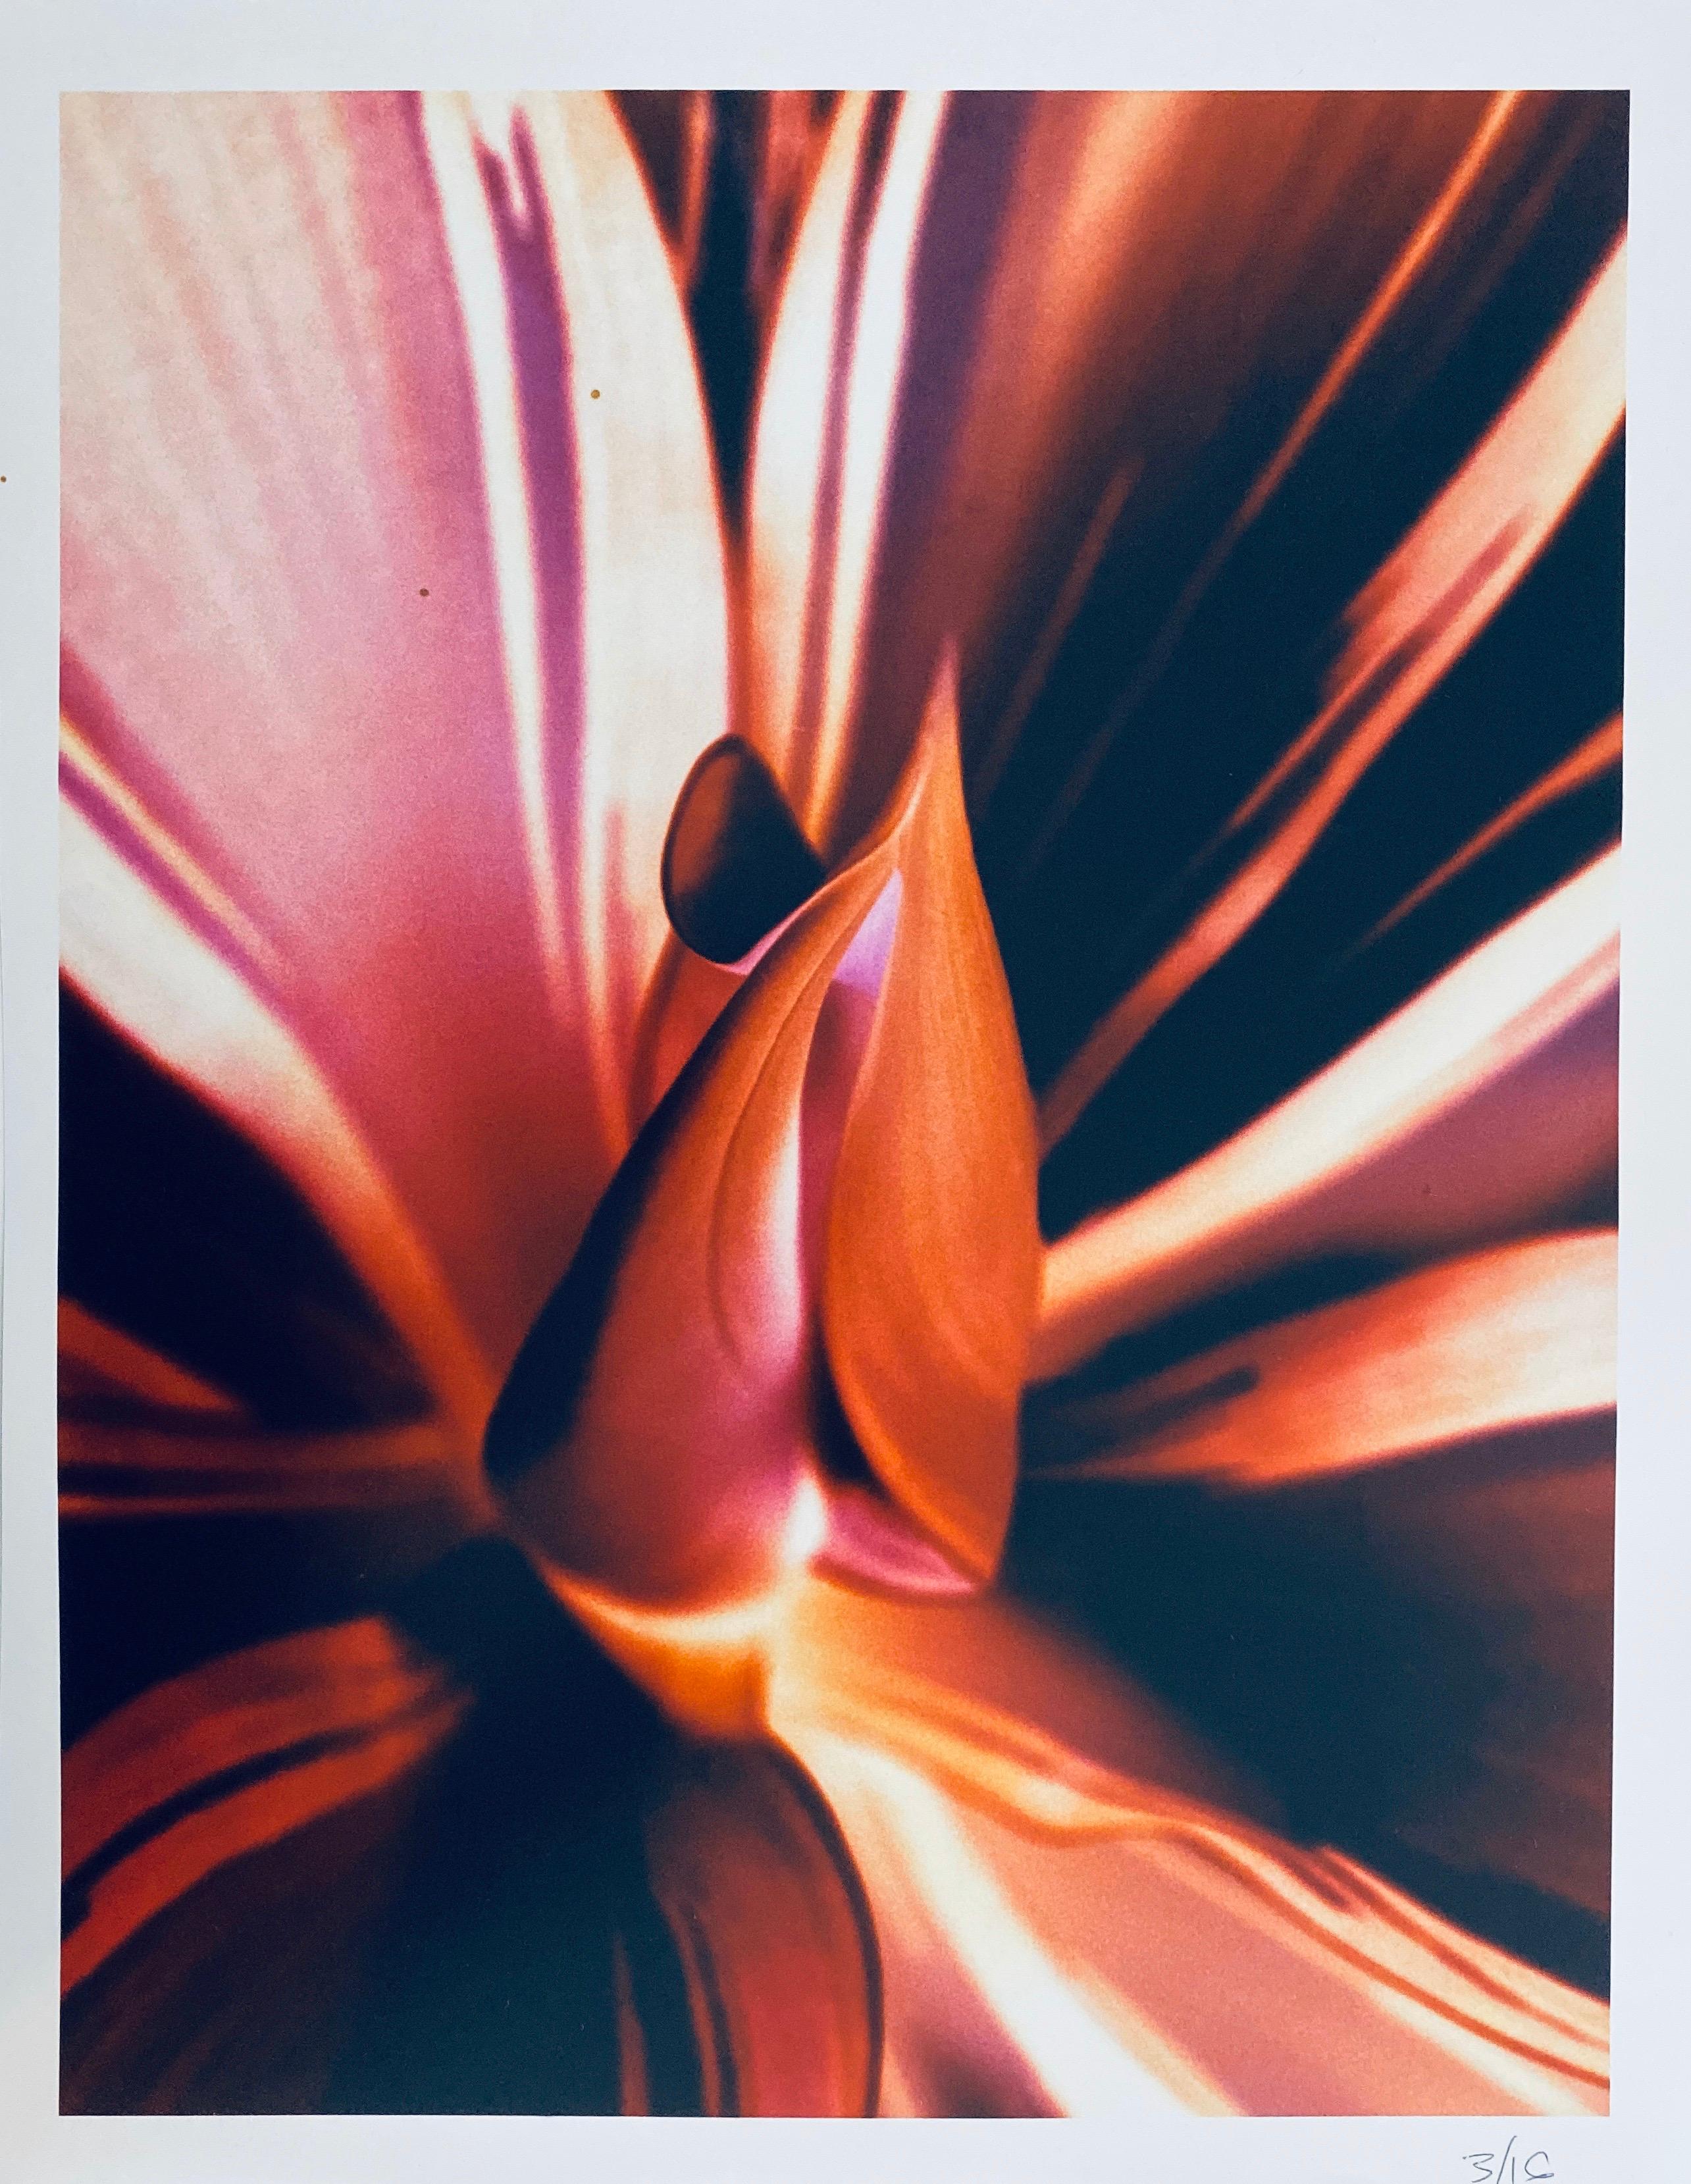 Flora Fauna Series Vintage Color Photograph Abstract Flower Fuji Crystal Photo